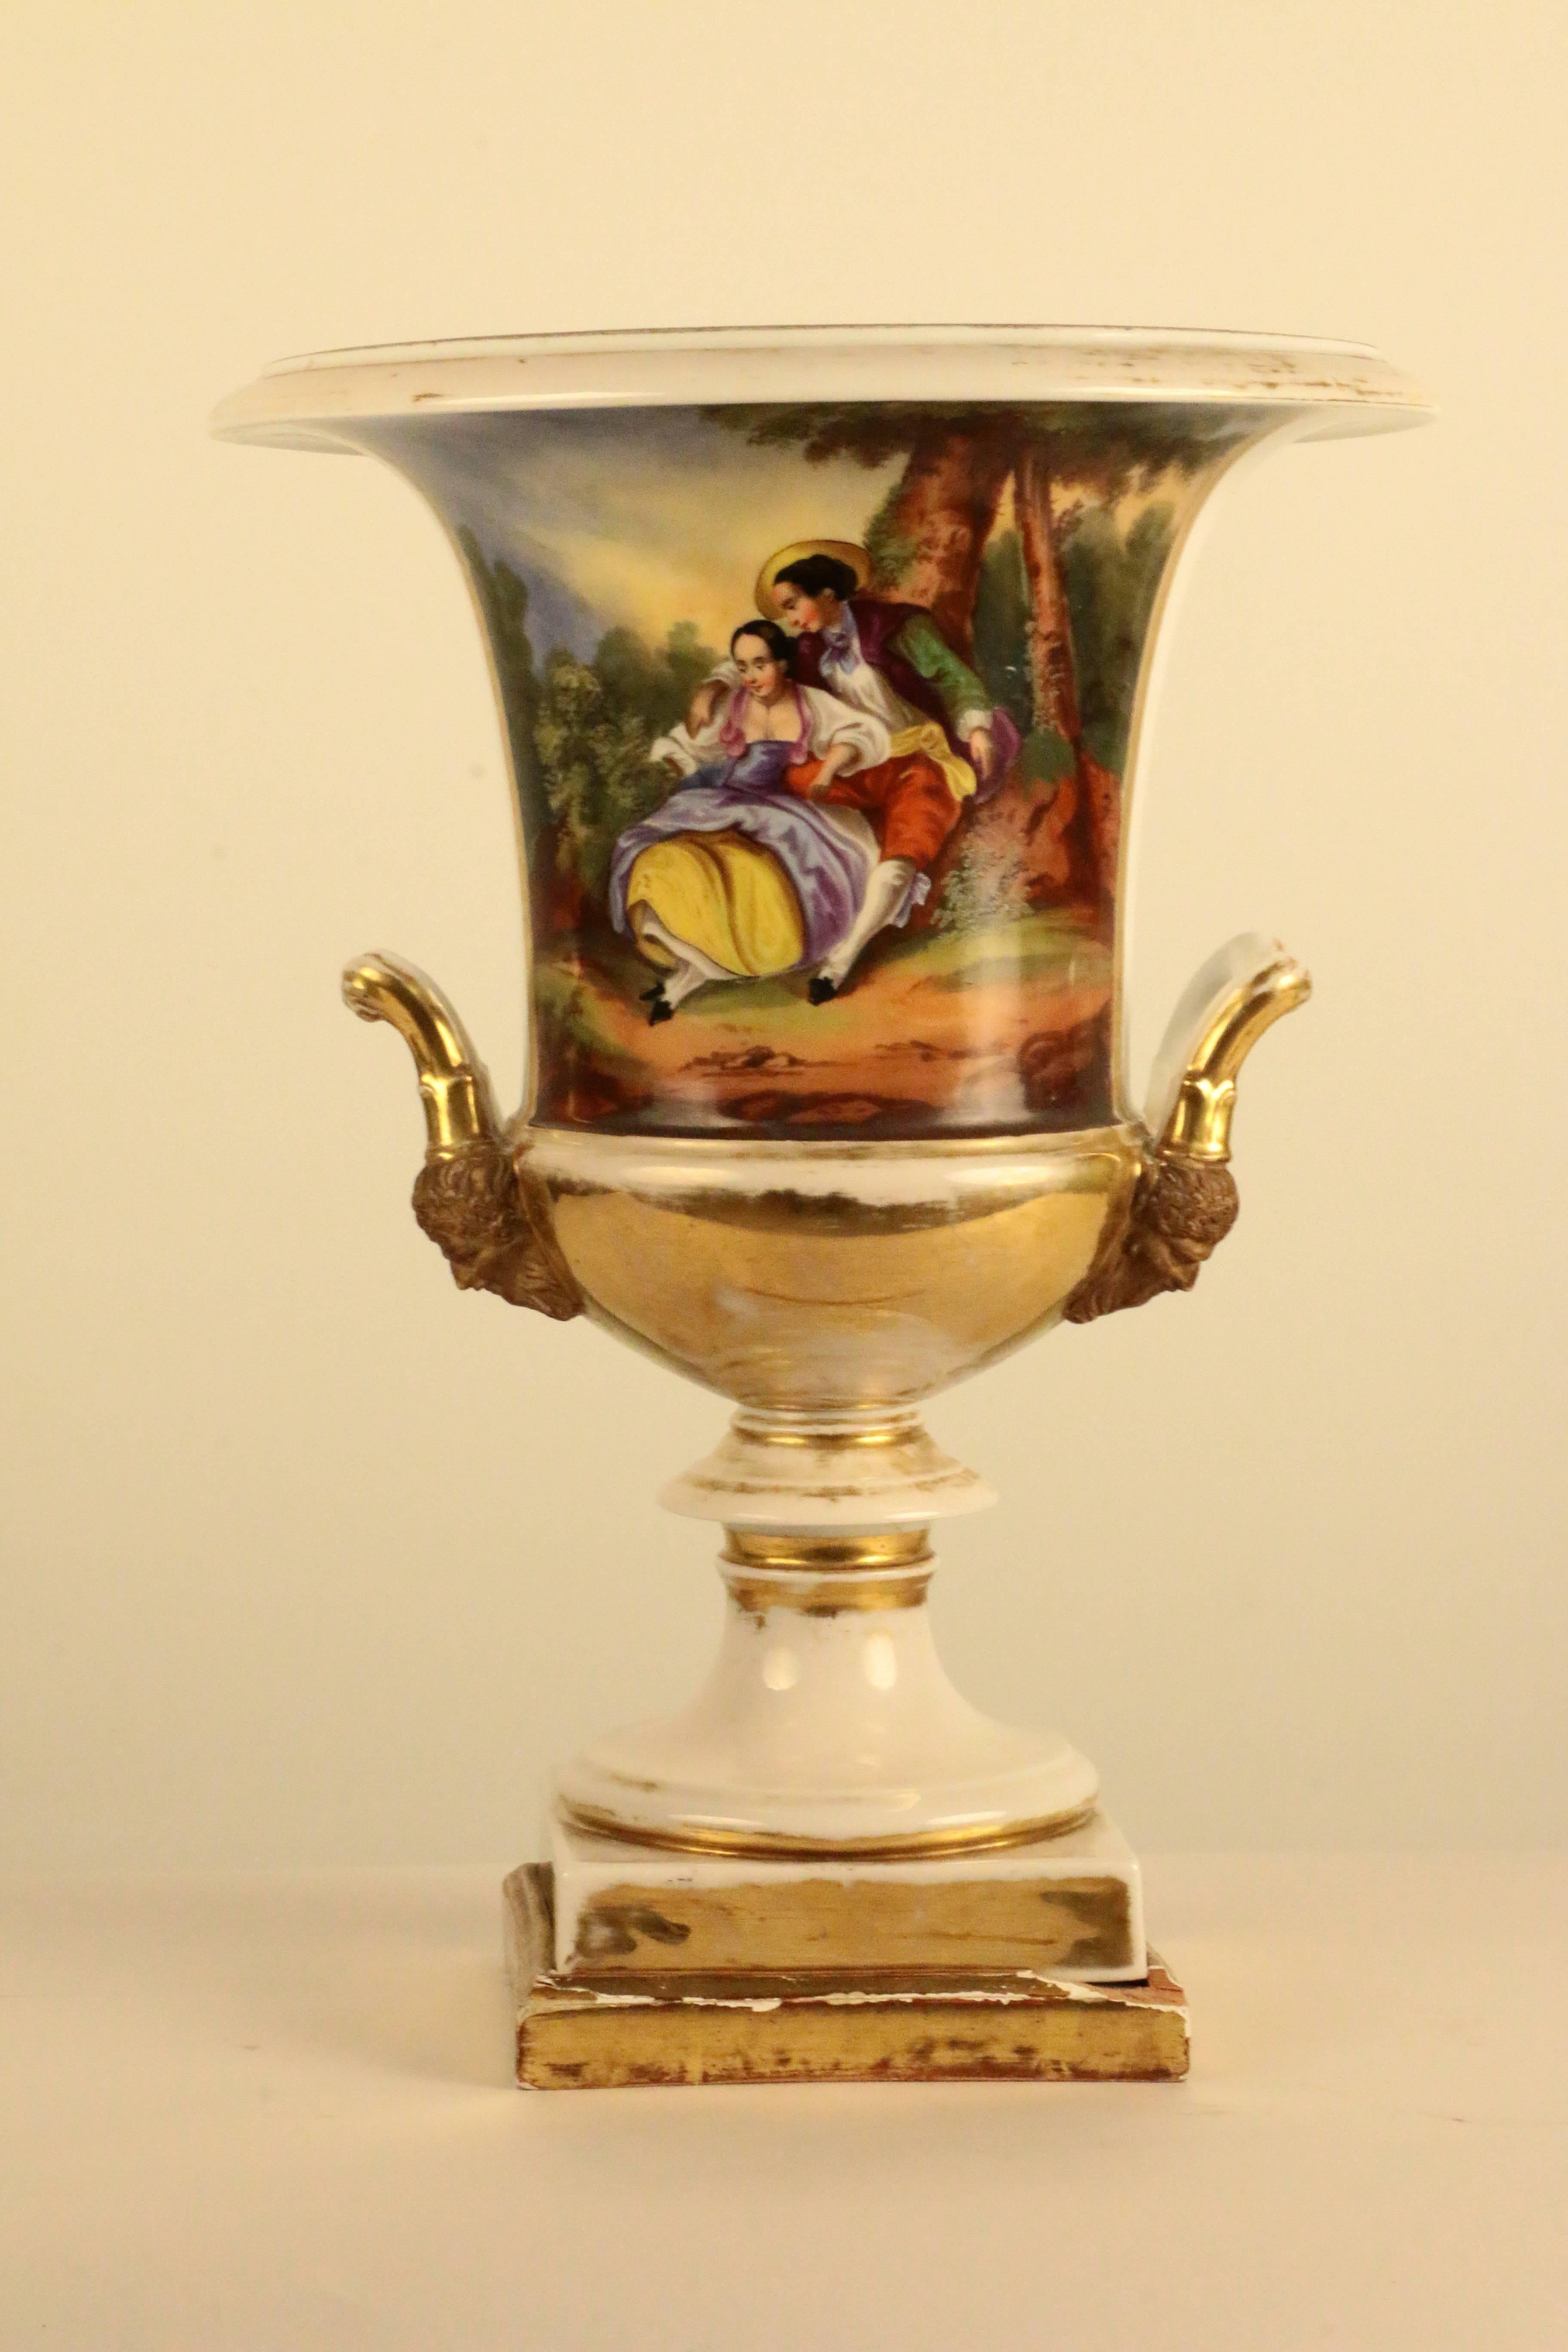 Now fitted as lamps, these two handled Paris urns are painted with floral bouquets on one side and a courtship scene on the other. The gilding is rubbed but the painting is well executed and a charming subject. Each is lit by a single candleform